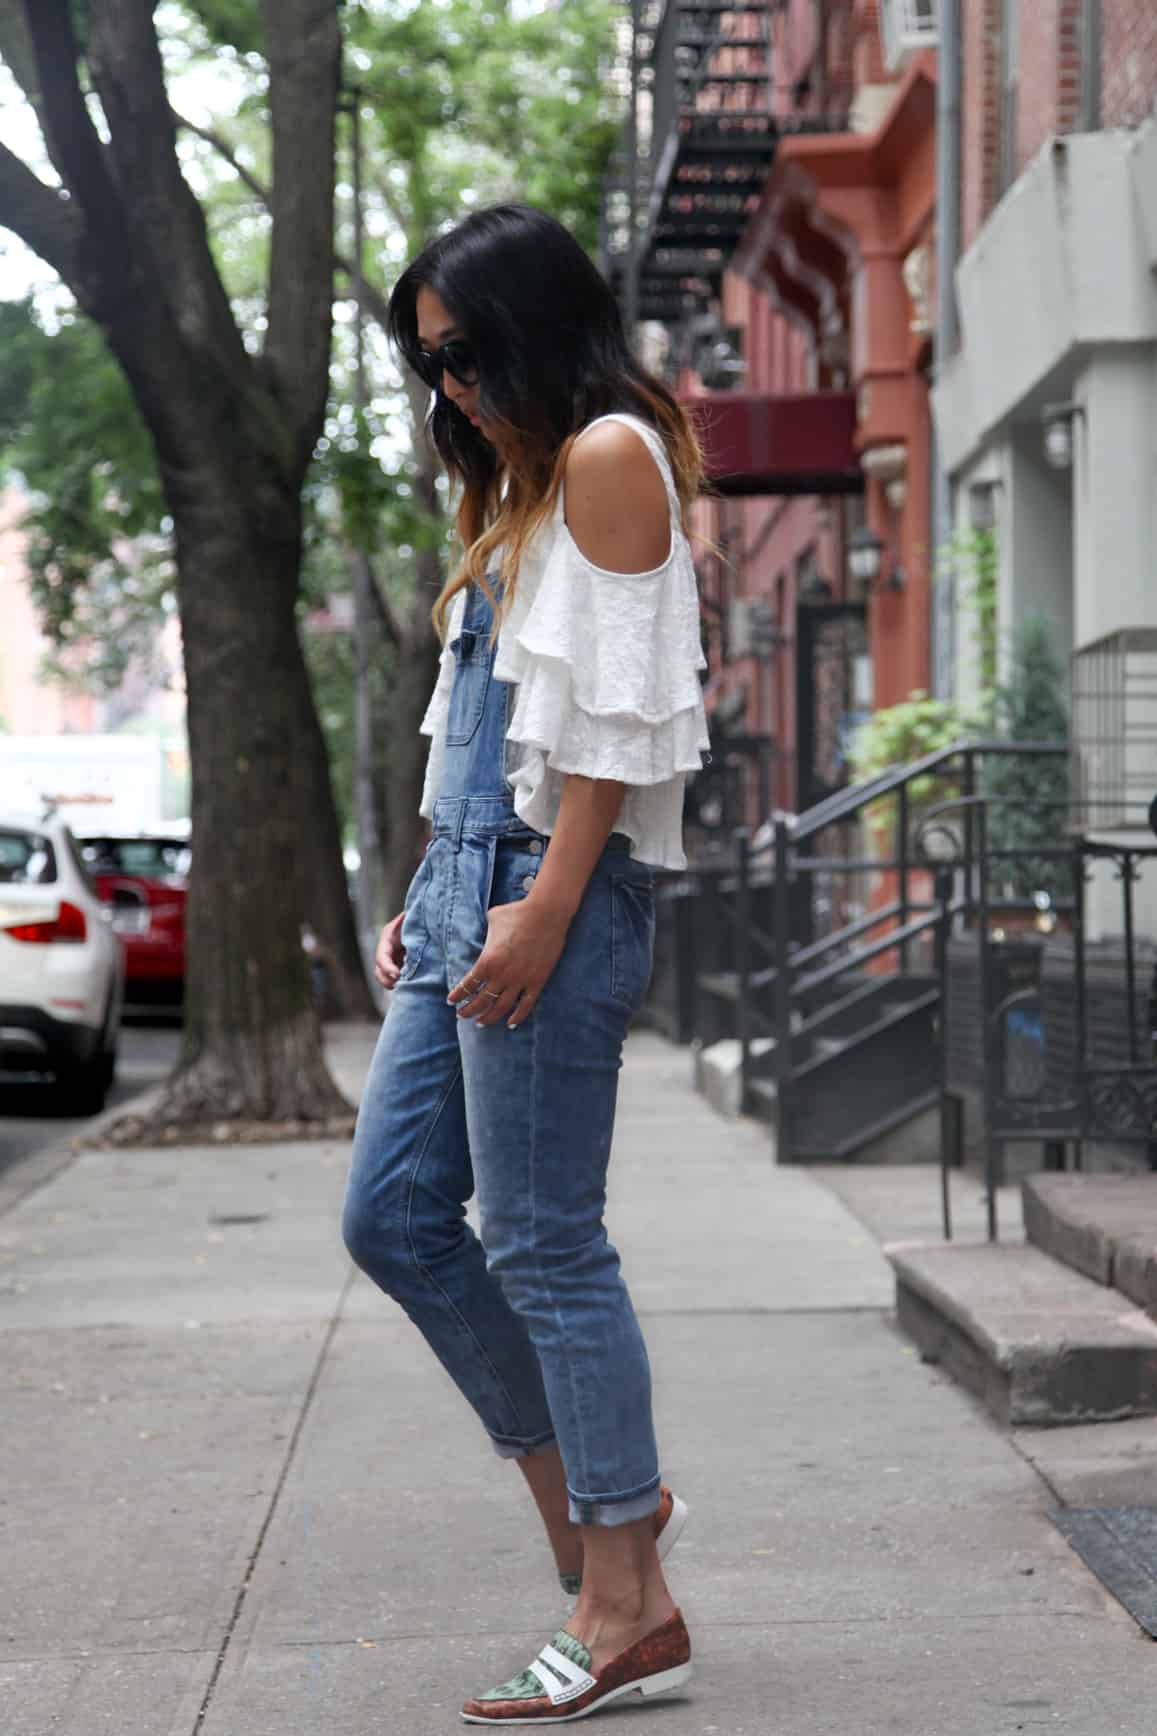 Overalls and ruffled blouse concert outfit idea